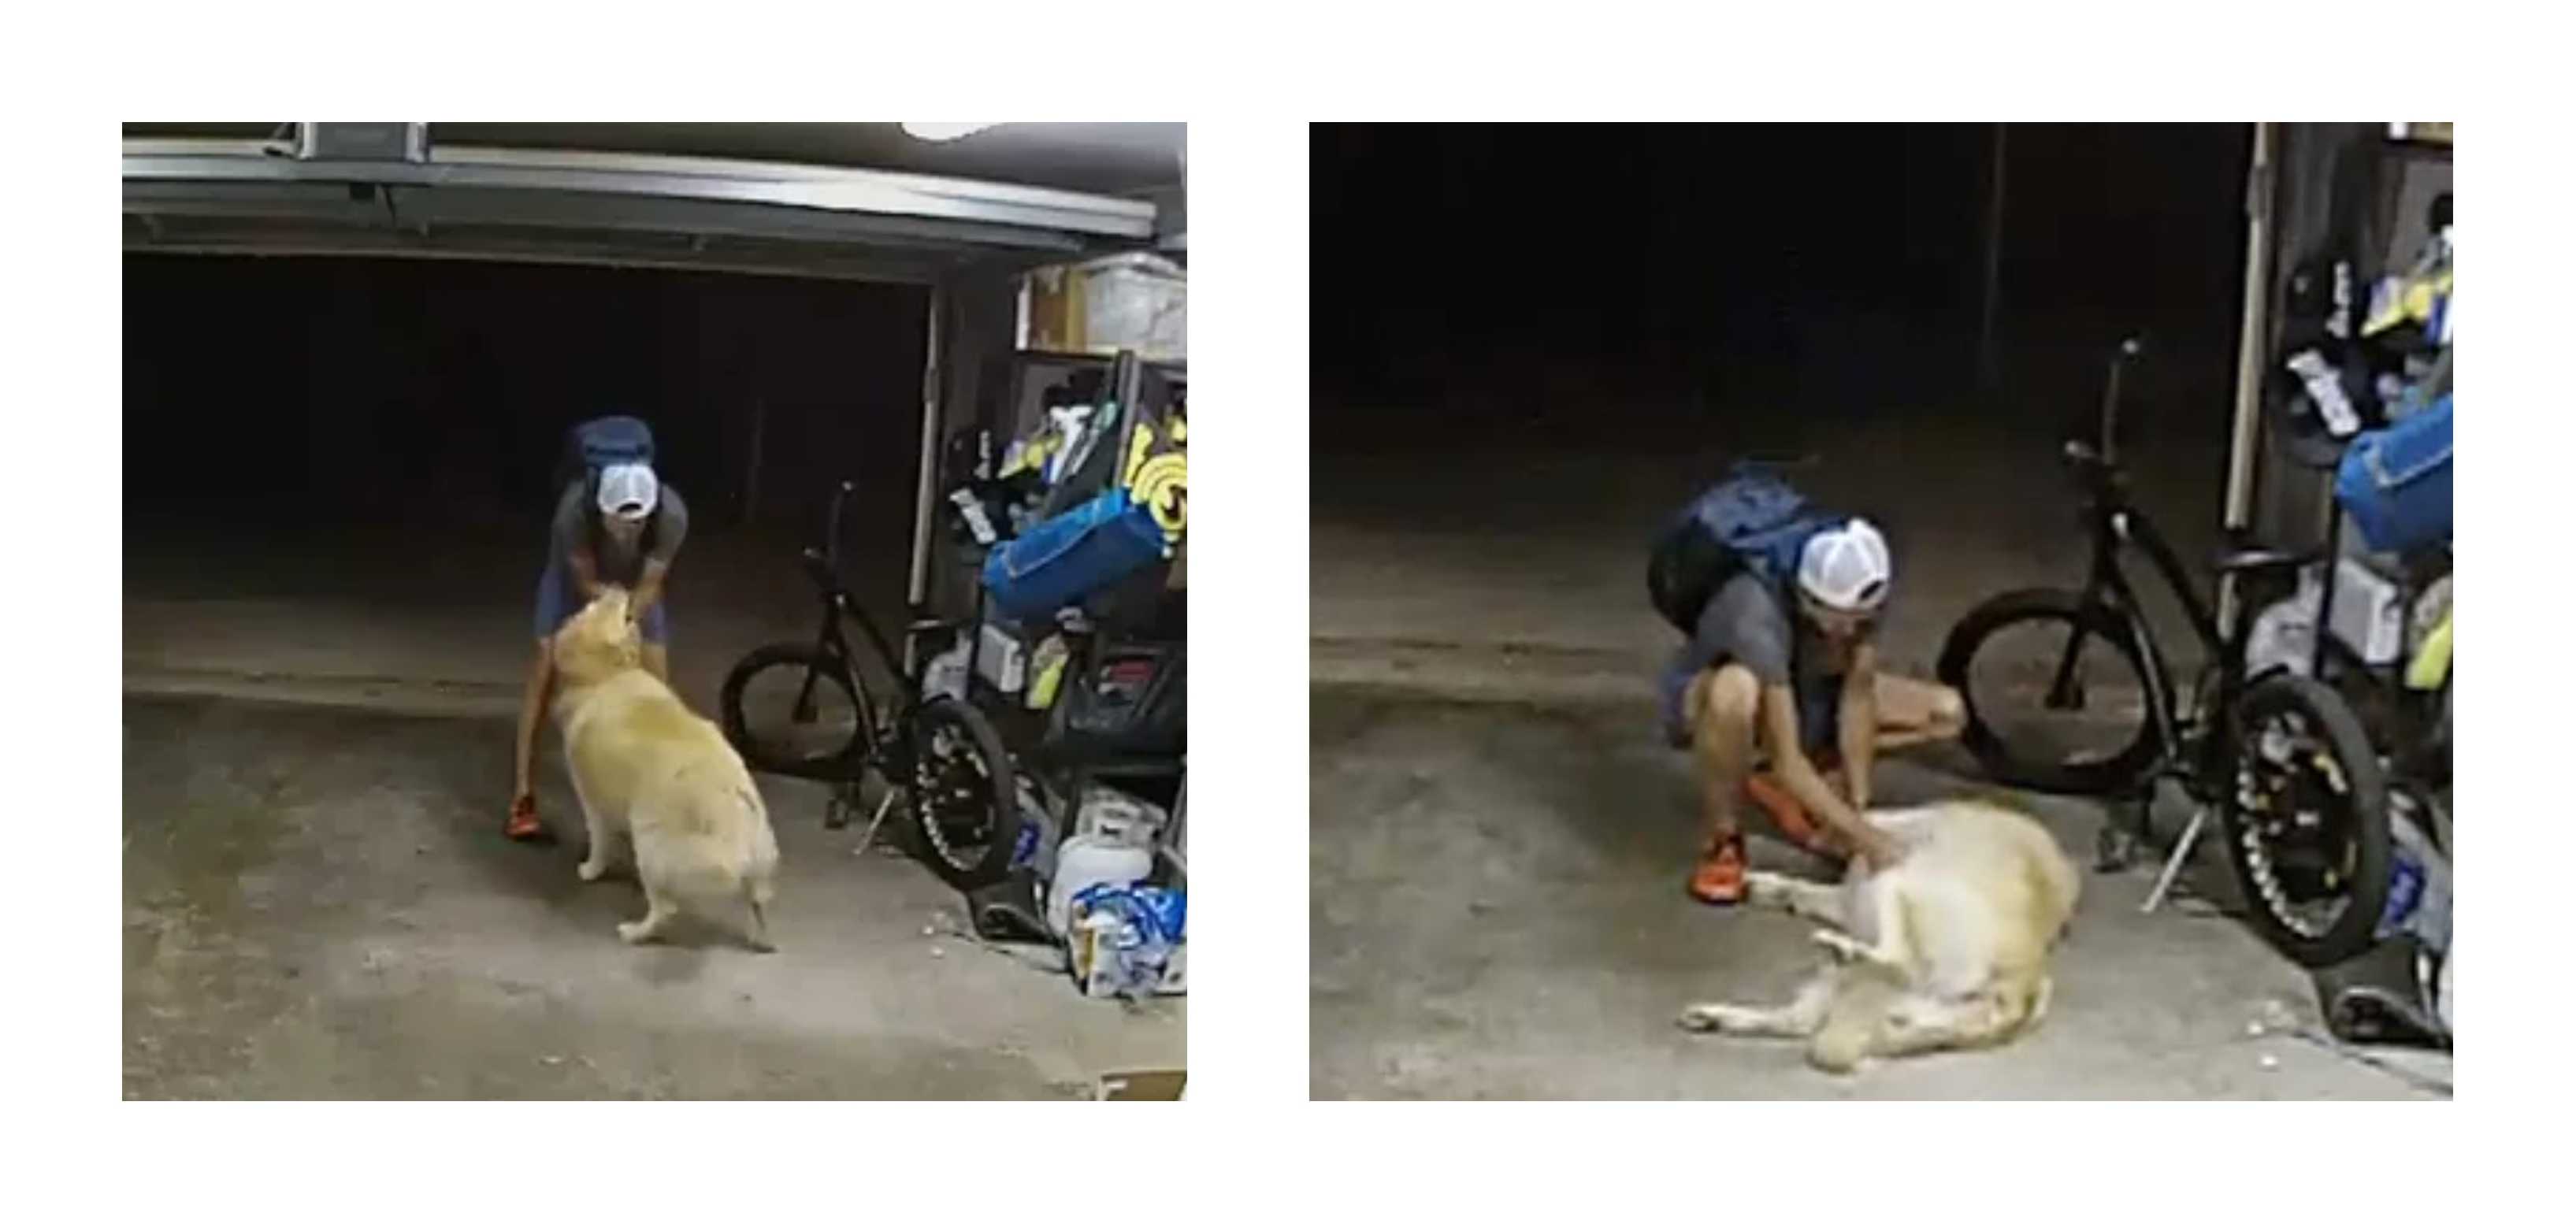 Burglar goes viral for petting victim's friendly dog before stealing: "You're a sweetheart"